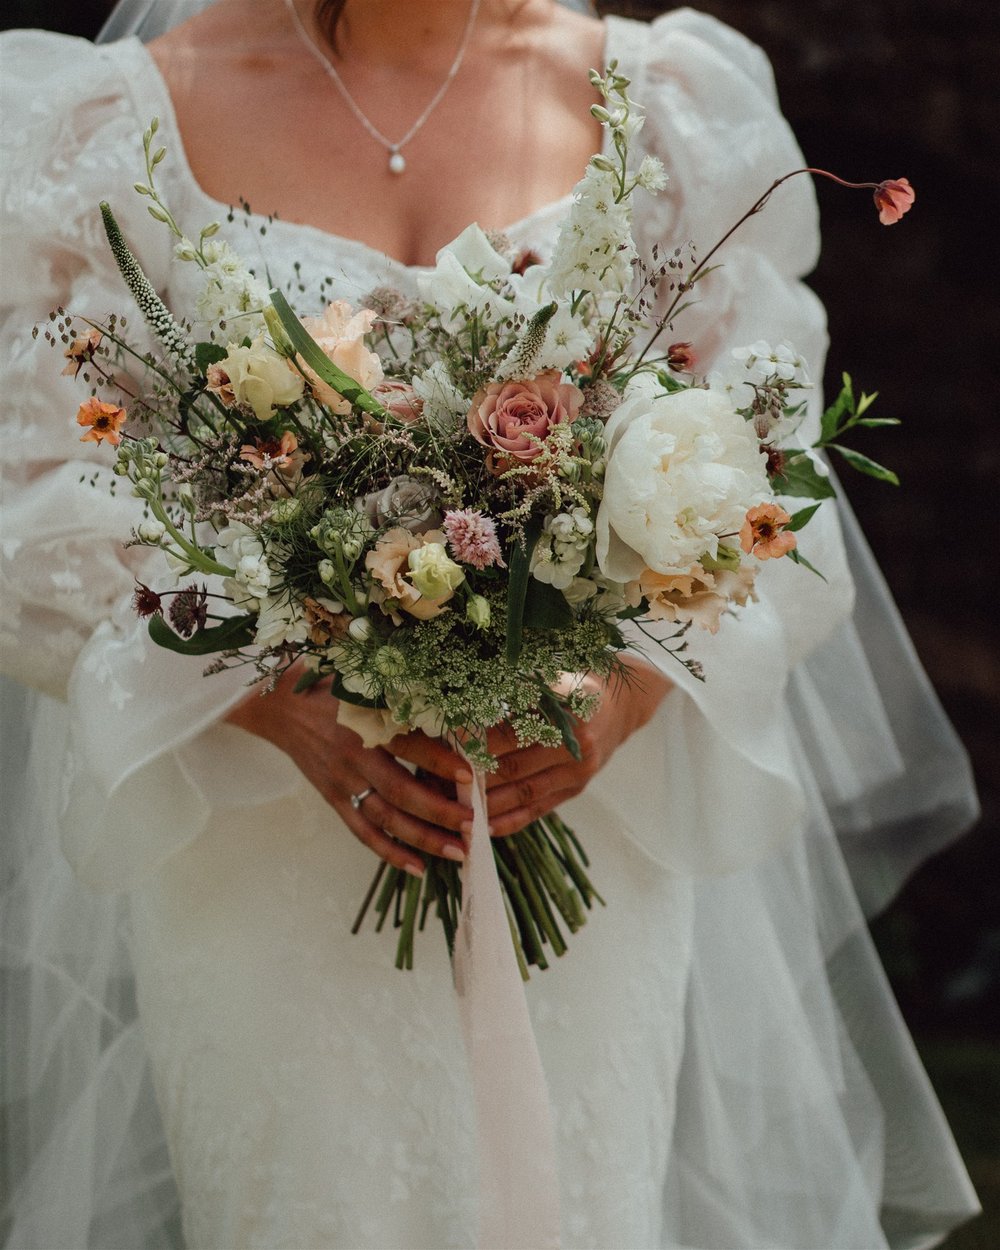 English garden bridal bouquet being held by bride in a couture gown